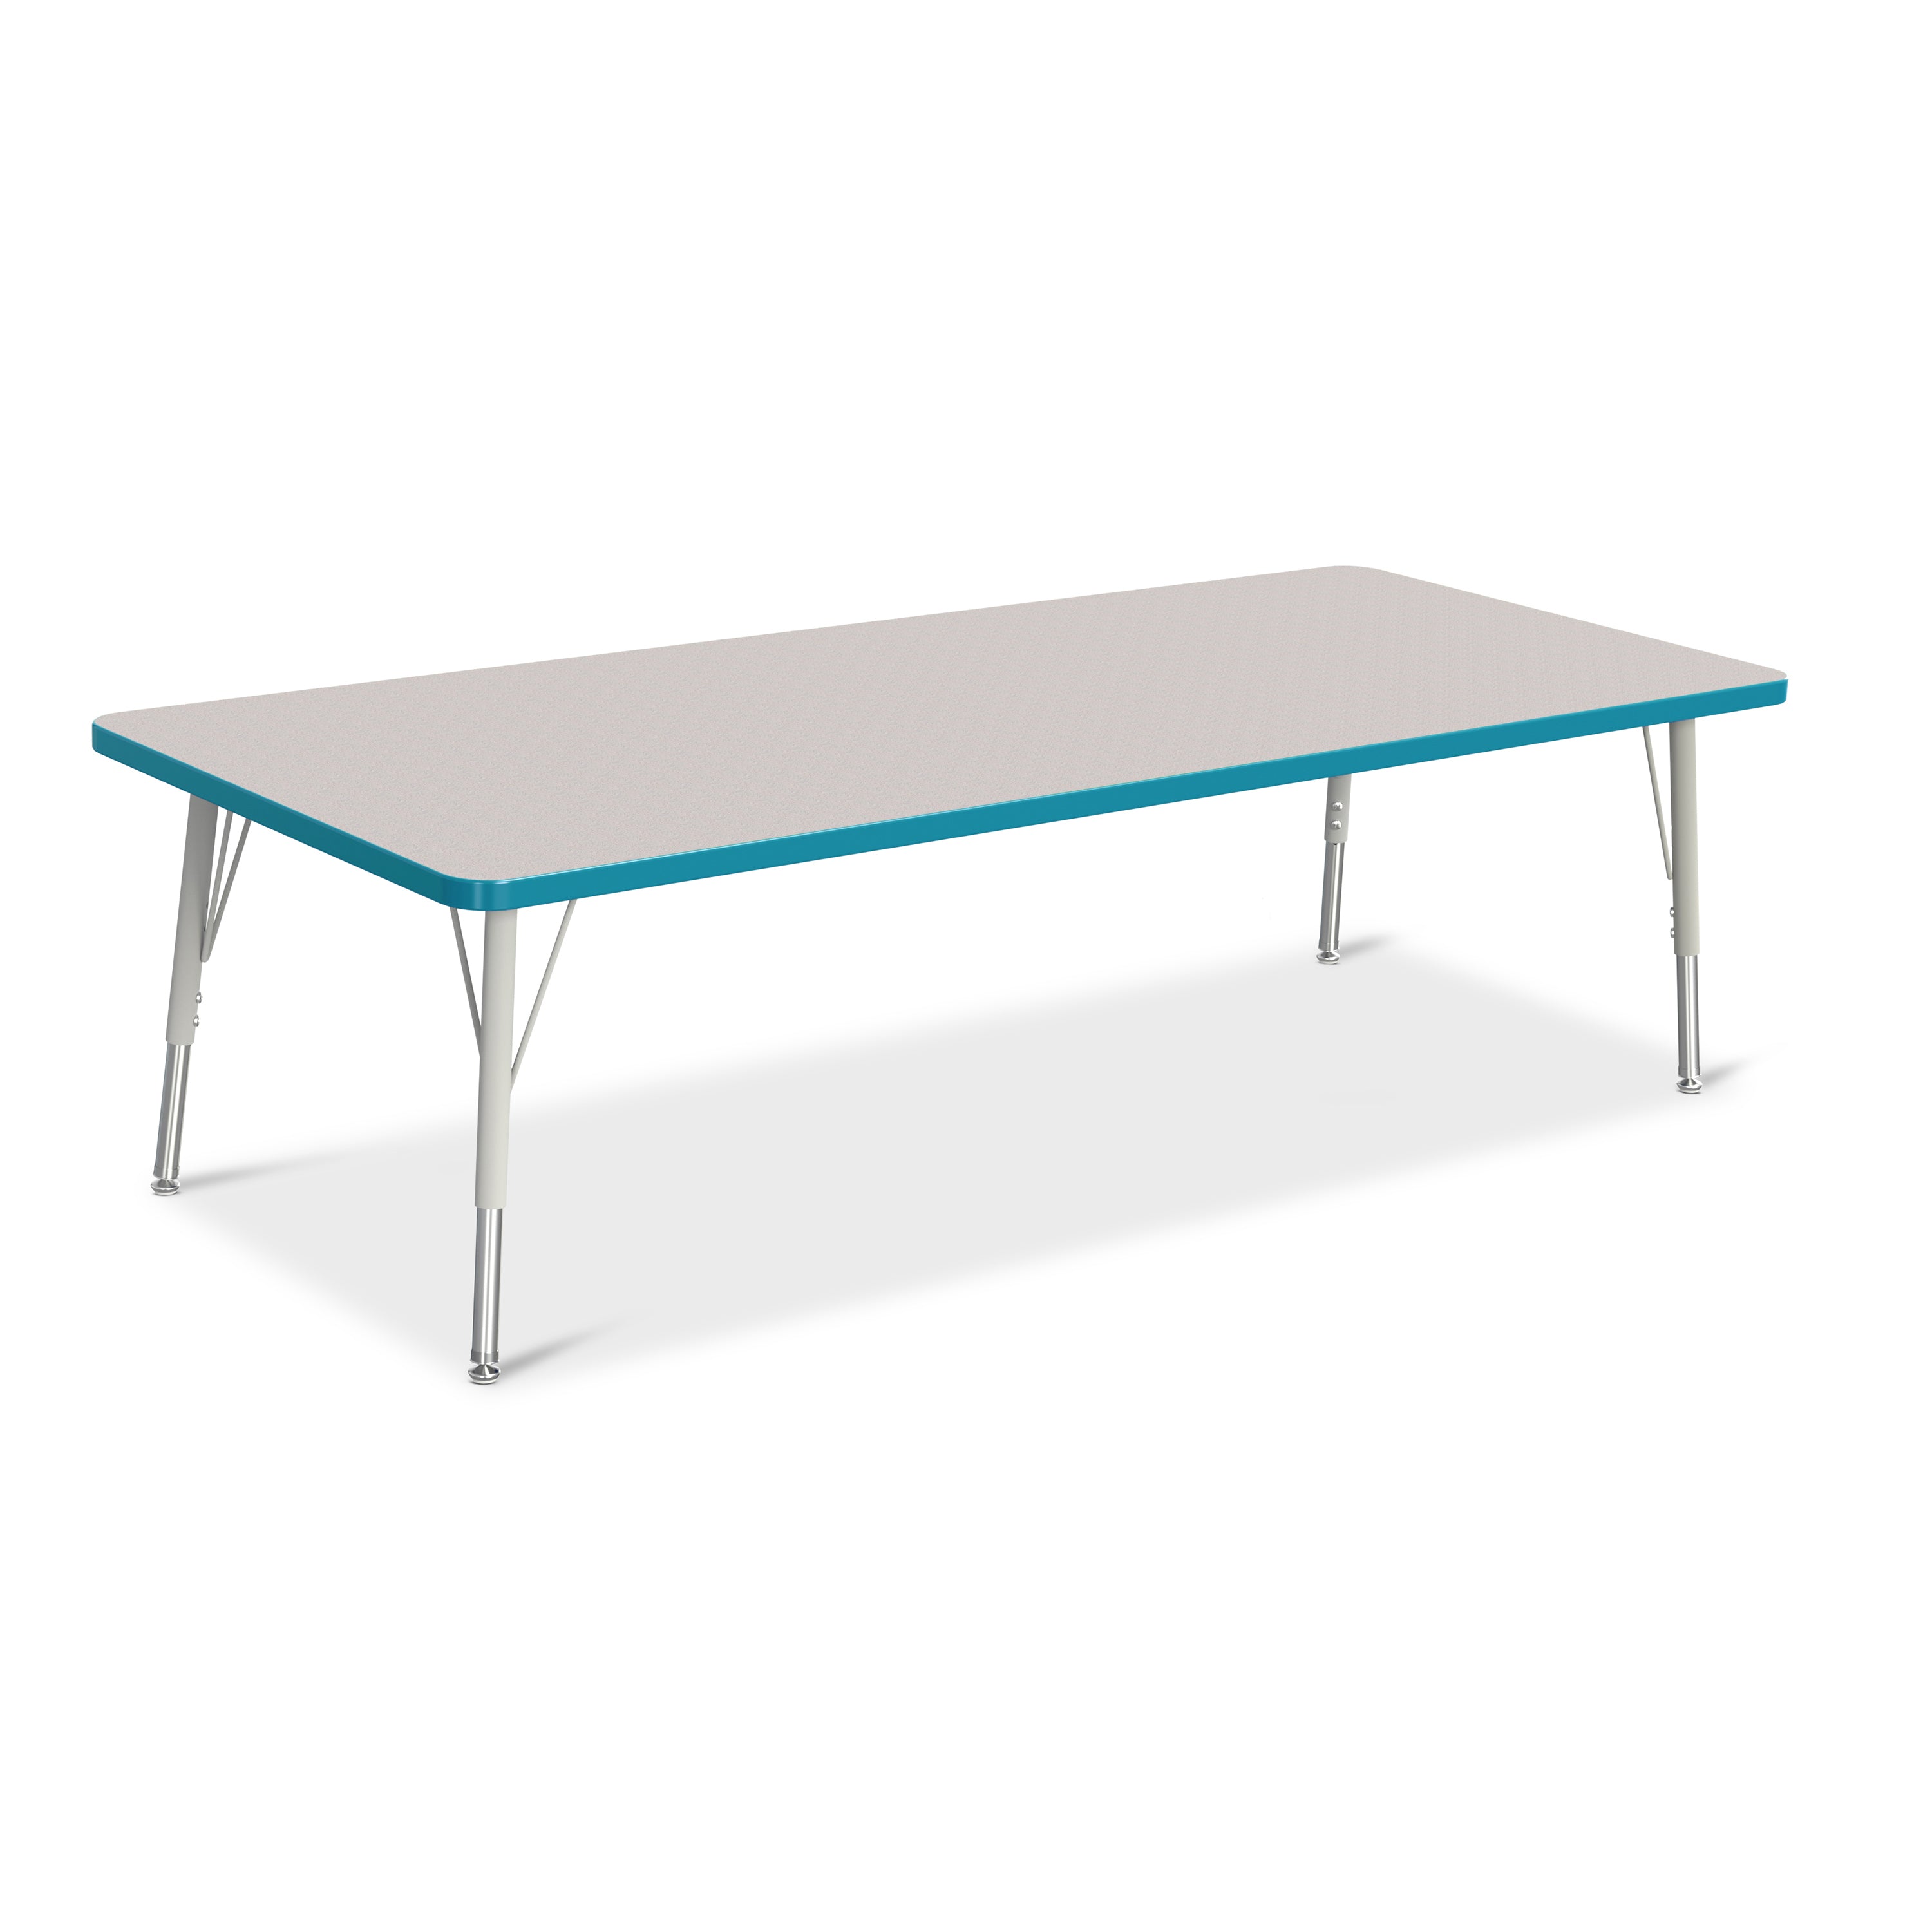 6413JCE005, Berries Rectangle Activity Table - 30" X 72", E-height - Freckled Gray/Teal/Gray